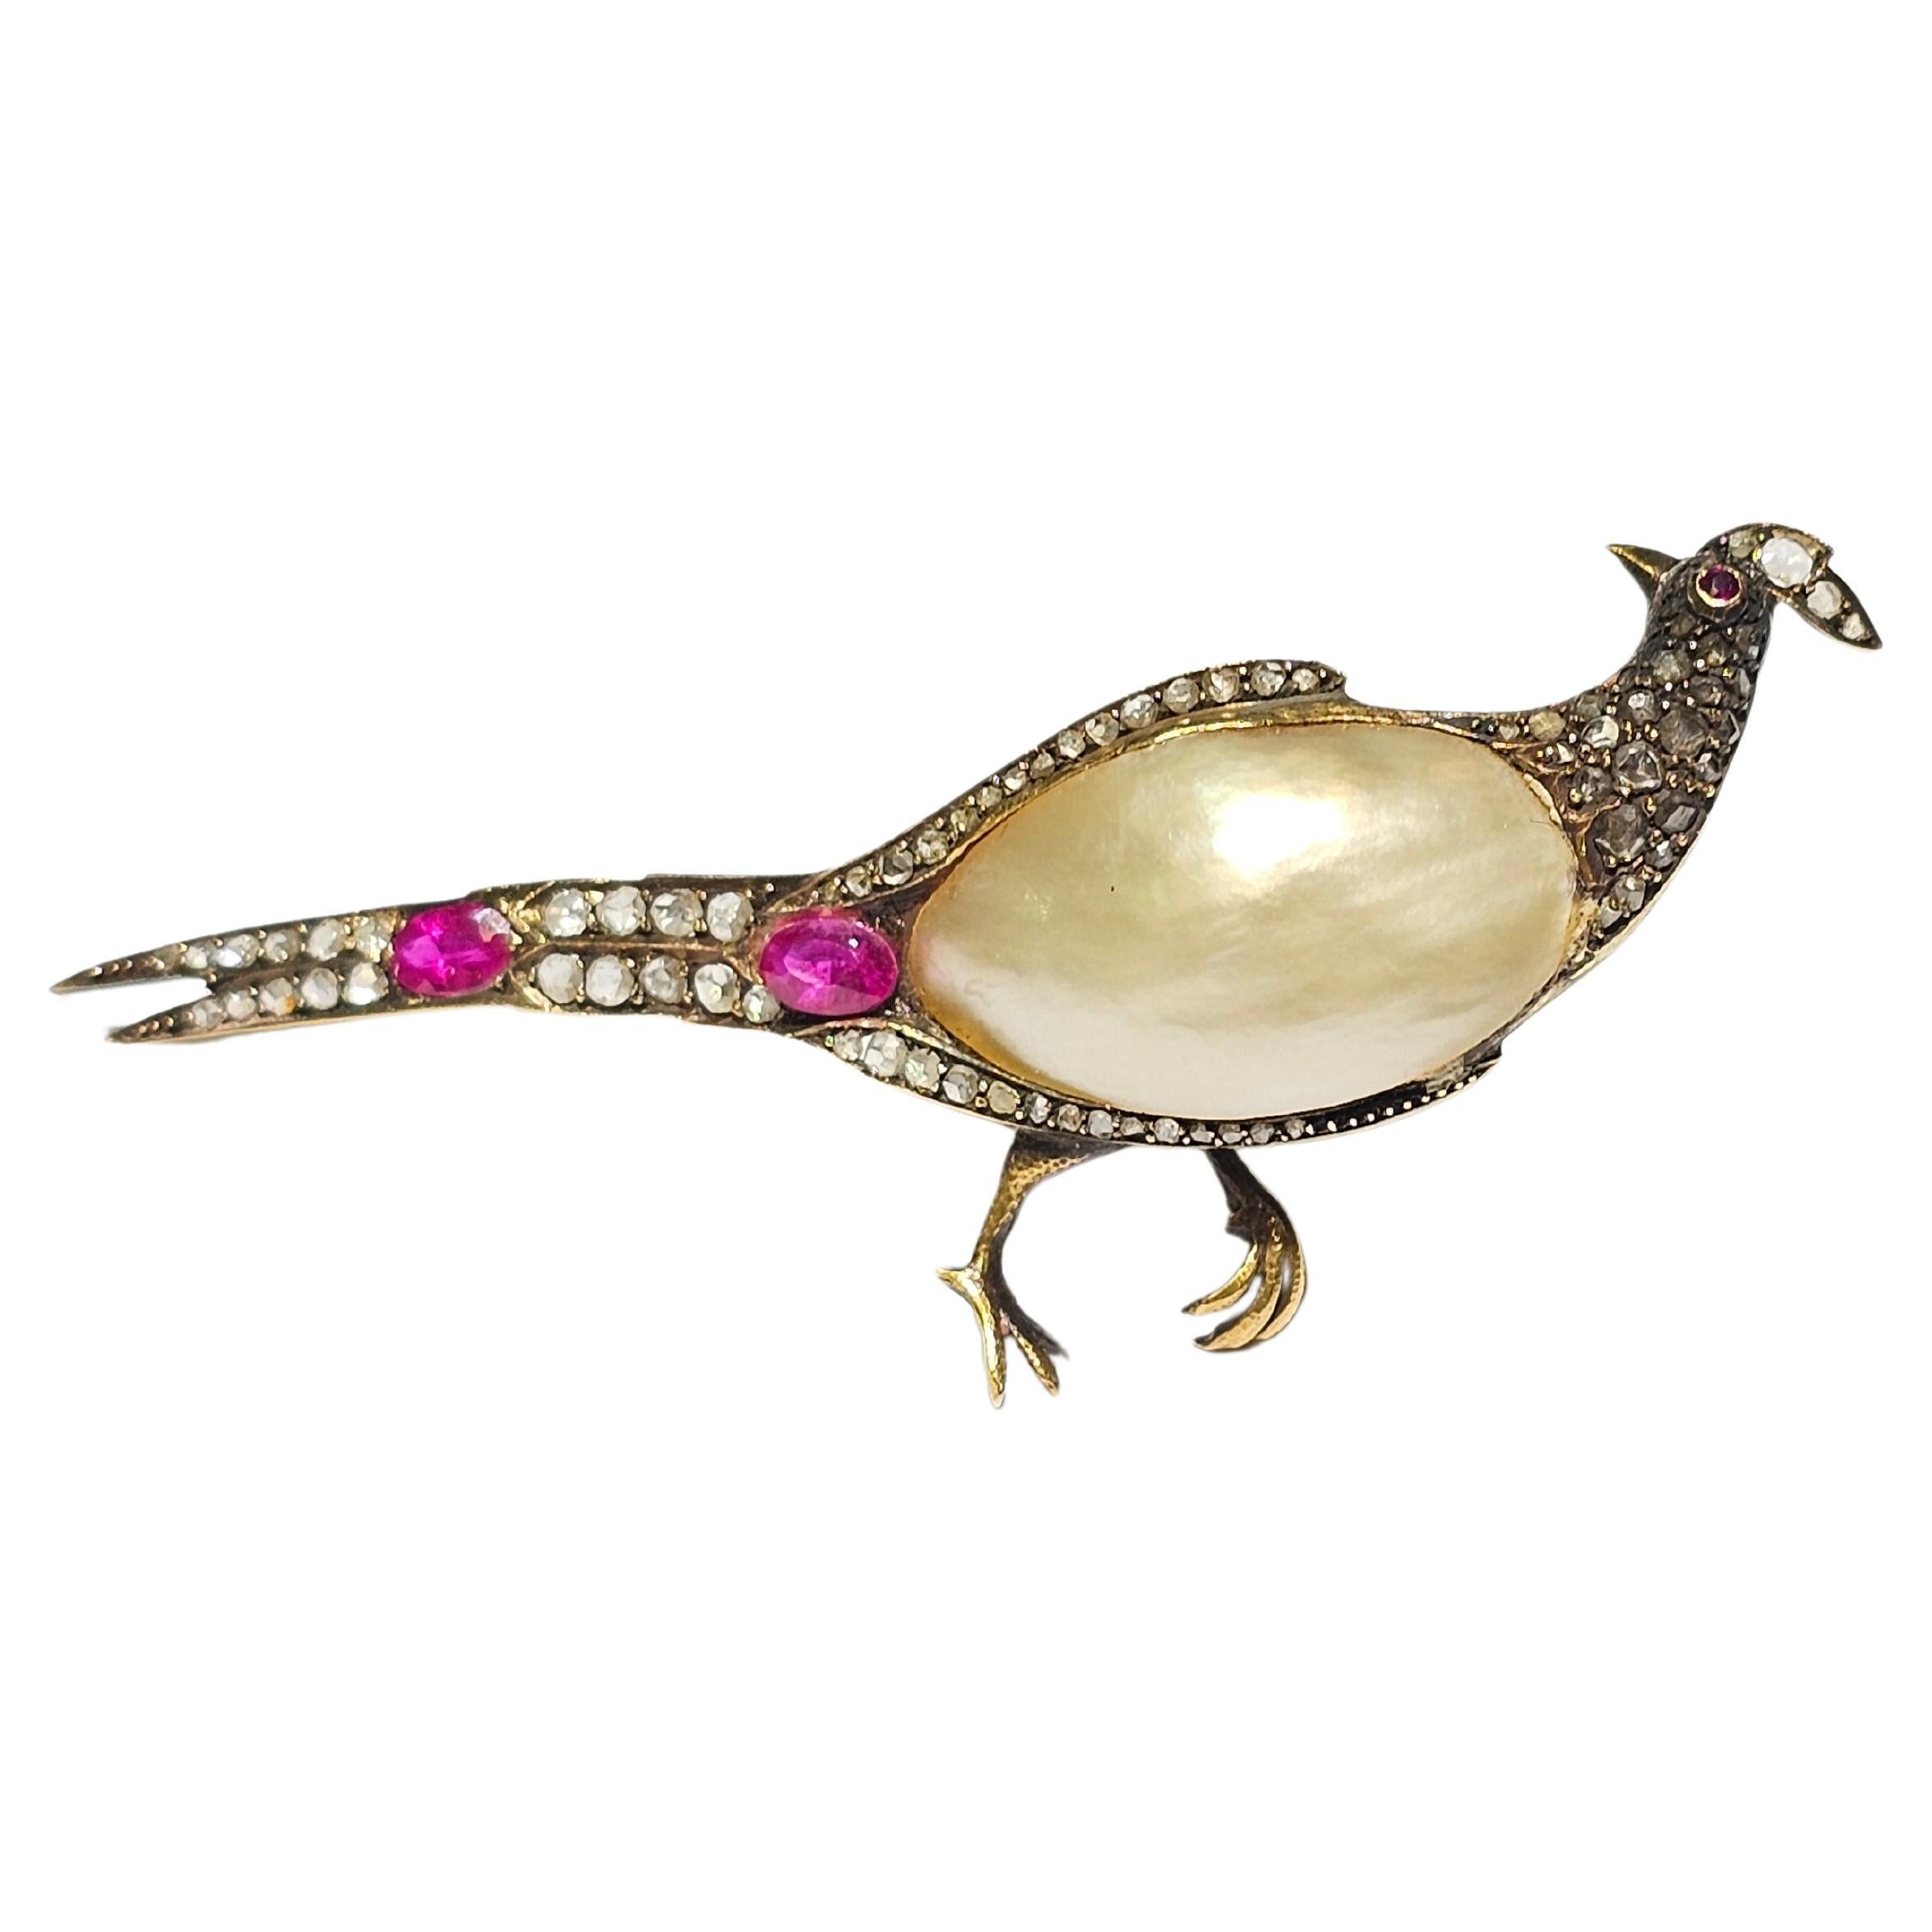 Victorian Pearl, Diamond, & Ruby Bird Brooch

An 18-karat gold bird motif brooch set with round cut diamonds, oval cut rubies, and a large mabe pearl

Measurements: 2.75